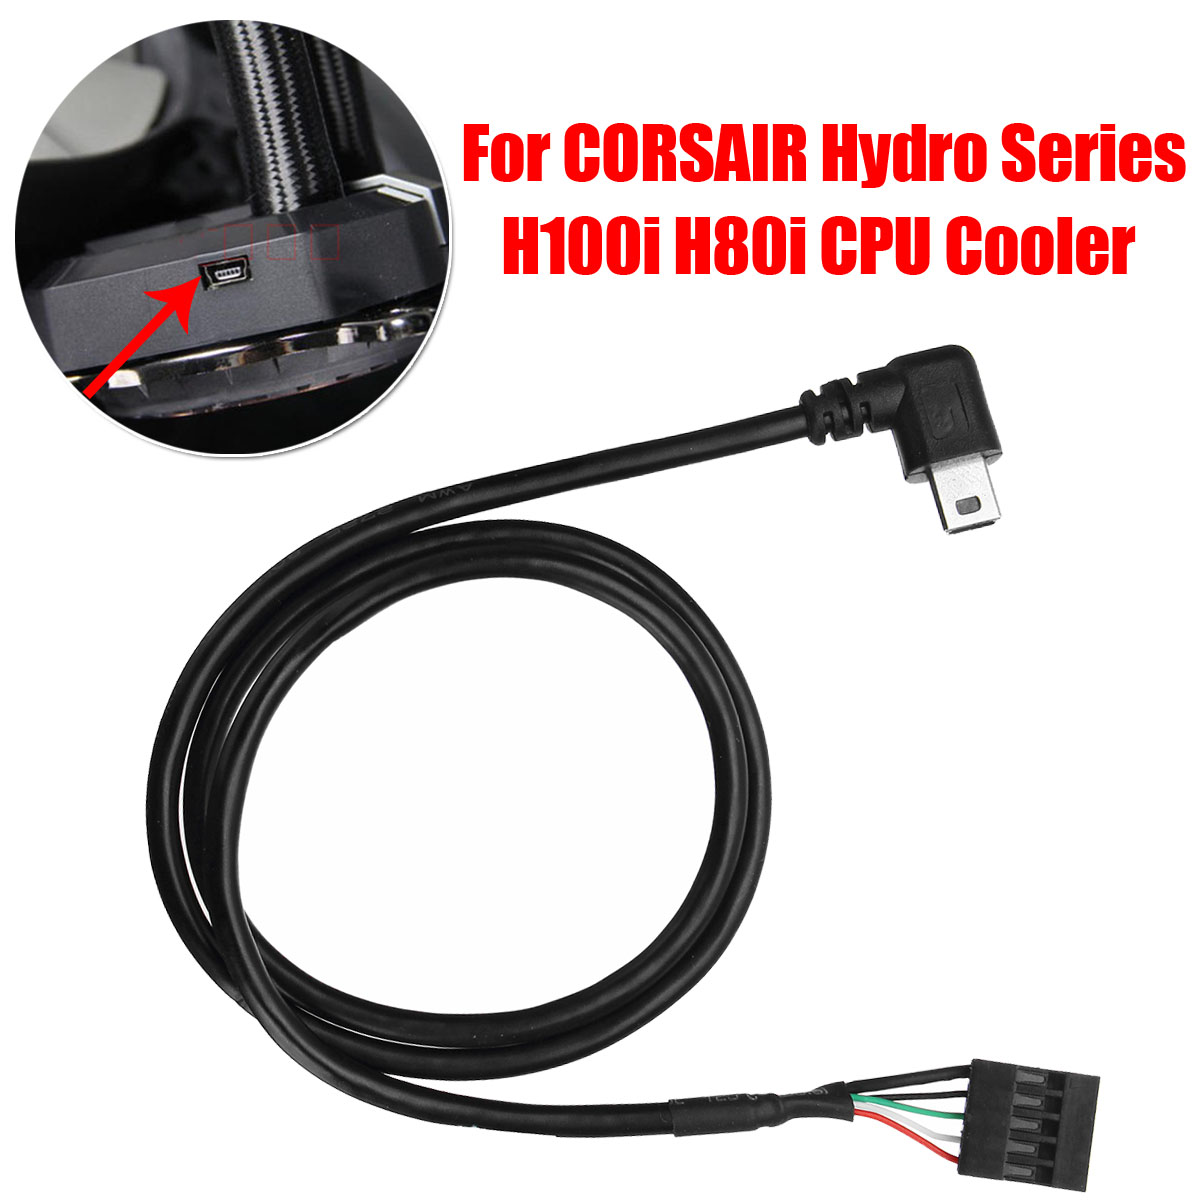 CPU-Cooler-USB-Interface-Cable-Cool-for-CORSAIR-Hydro-Series-H80i-H100i-1740594